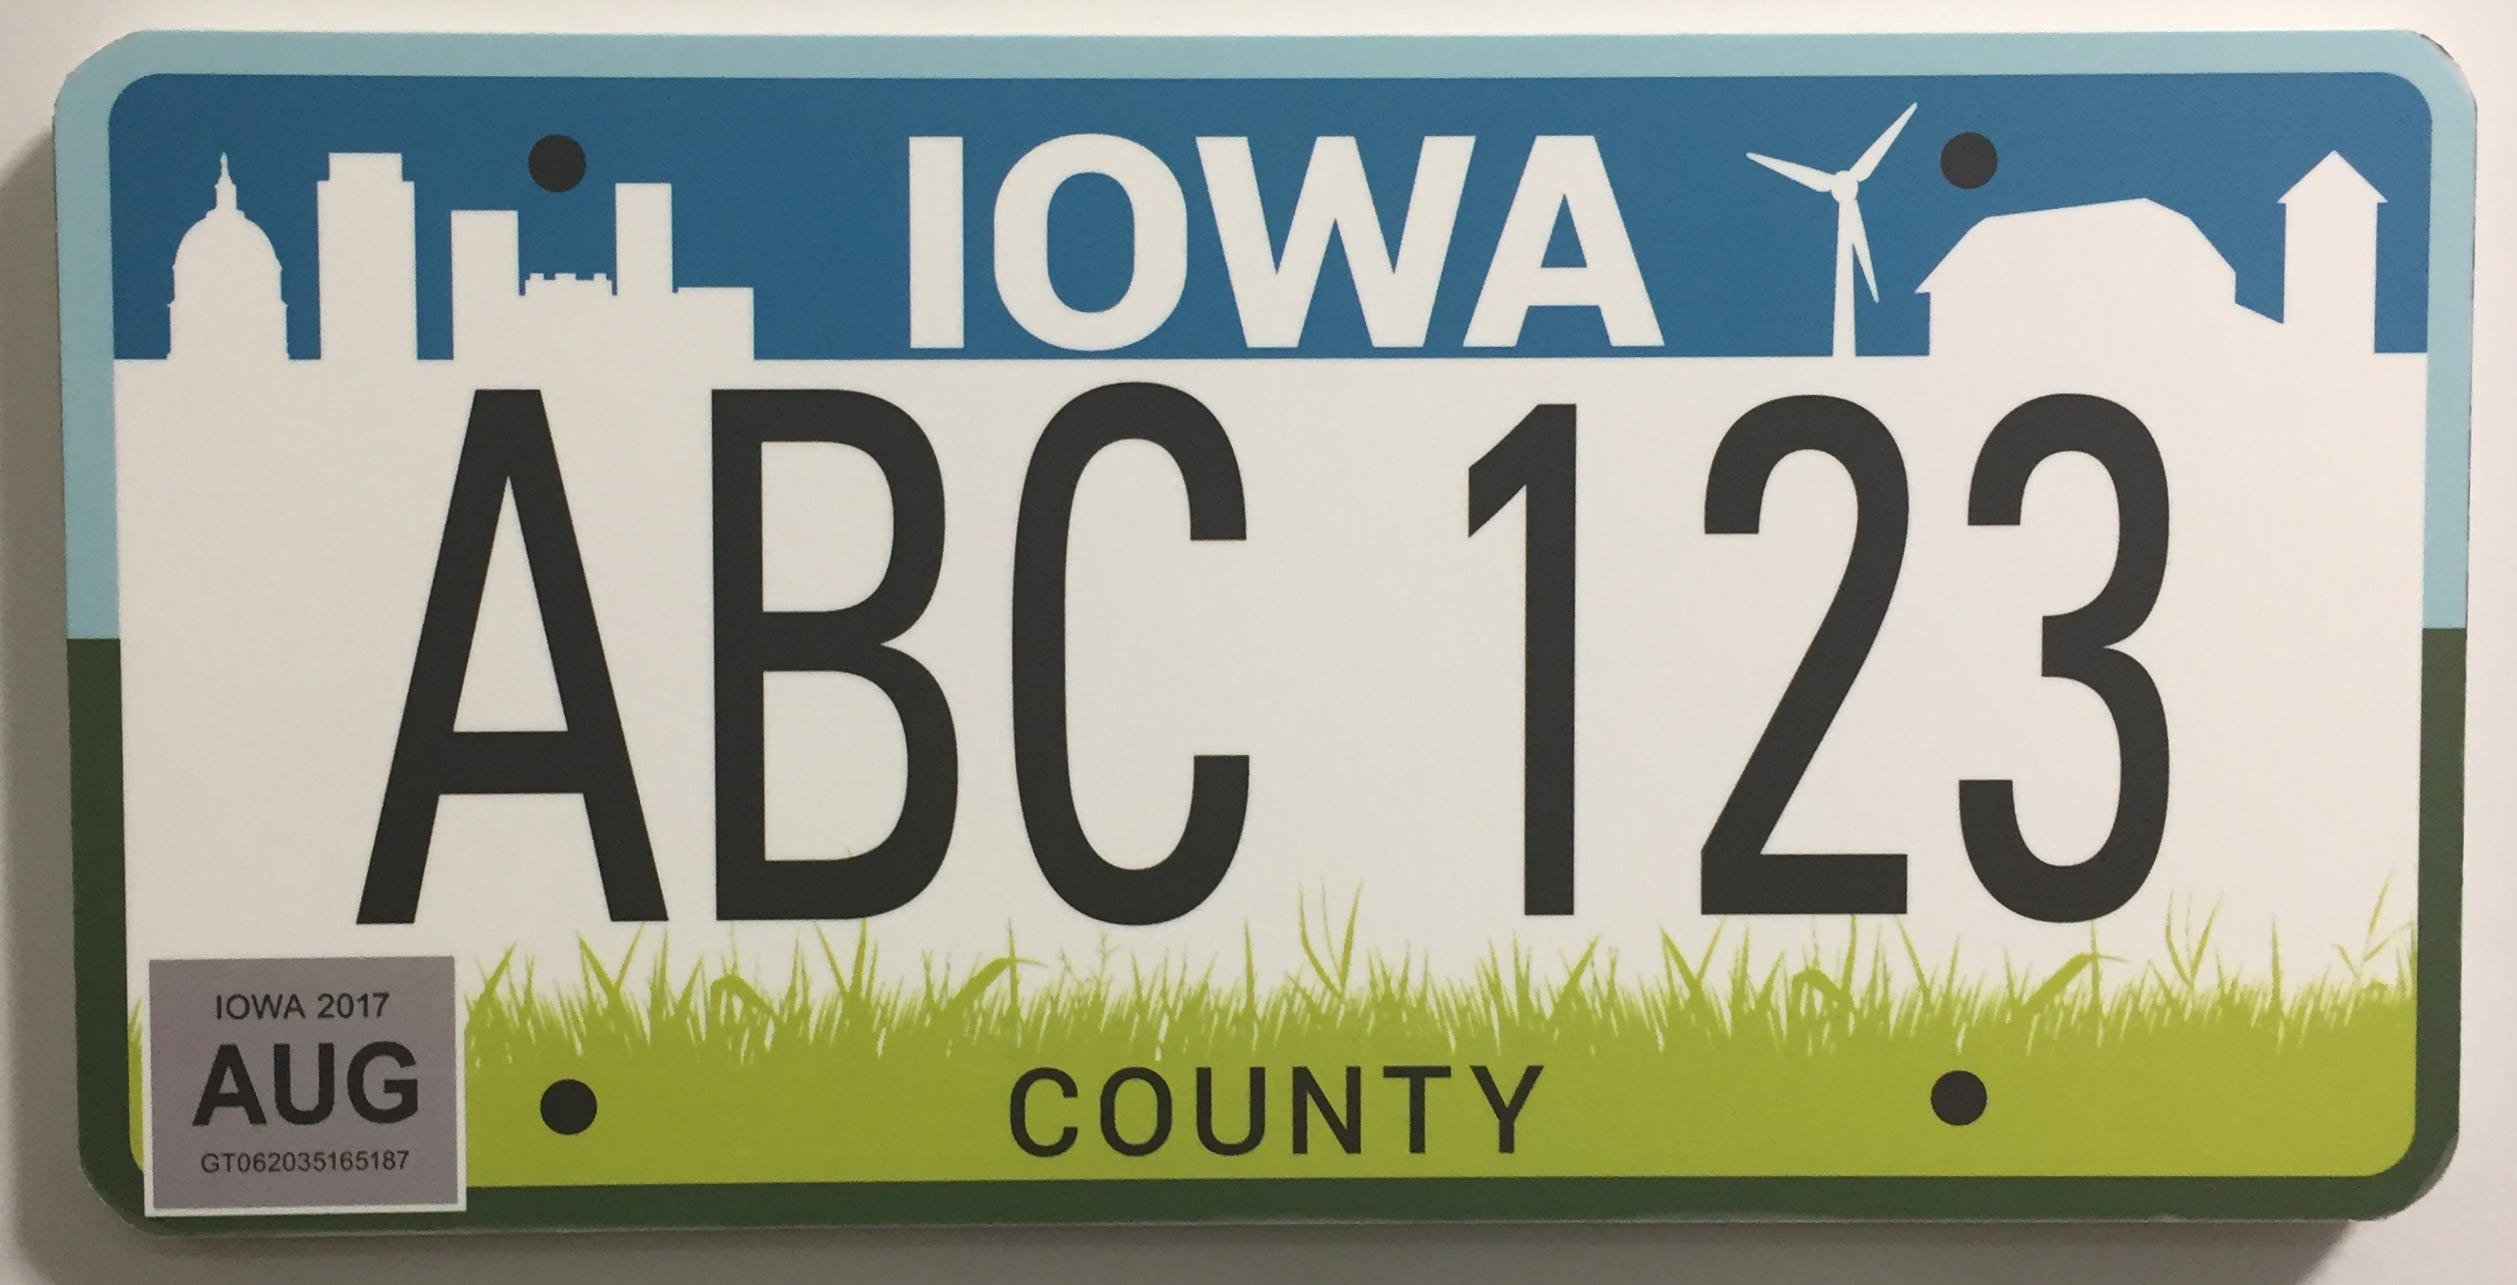 In 2017 Iowa voters approved a new design for the state's license plate.  Along with a silo and a smokestack is a wind turbine, representing an industry that provides 57% of Iowa's electricity.